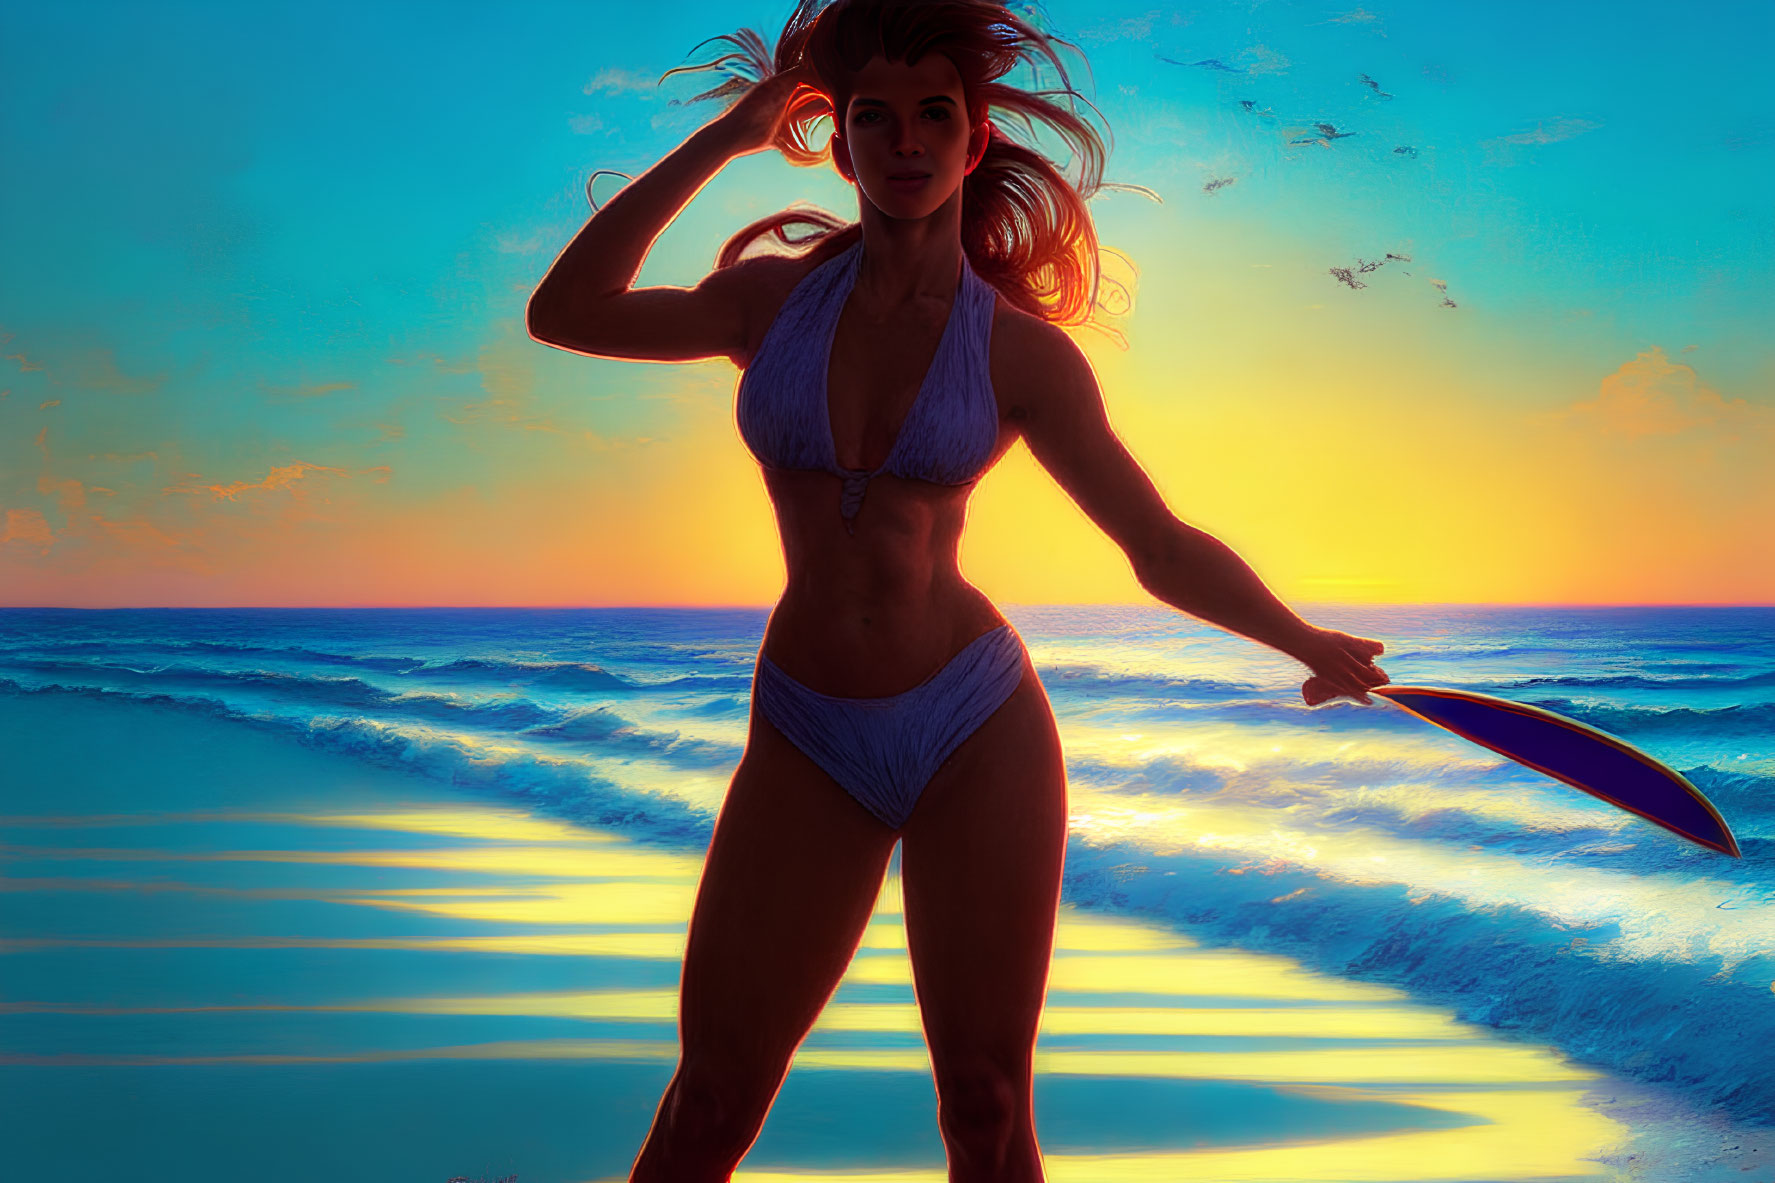 Woman in bikini with frisbee on beach at sunset with waves and birds